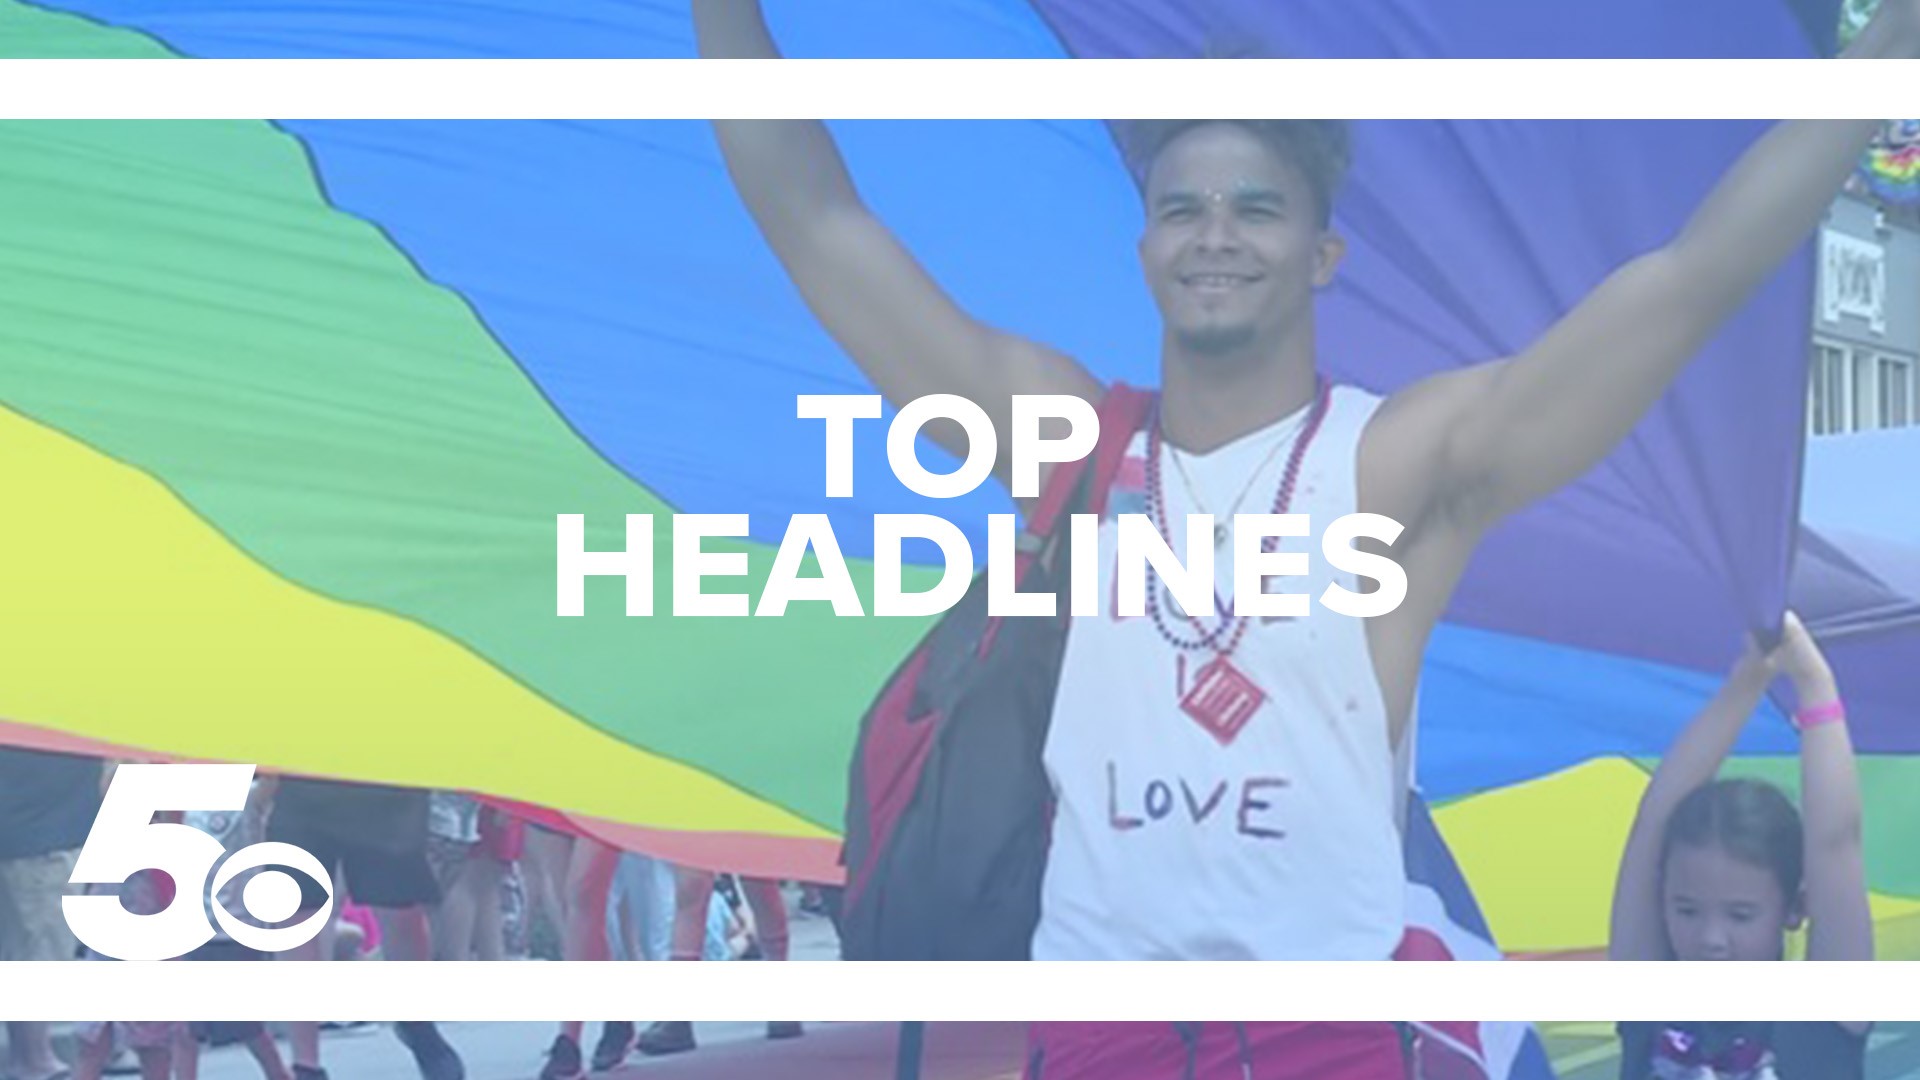 Check out today's top headlines including weather, local Pride events this weekend, and more!